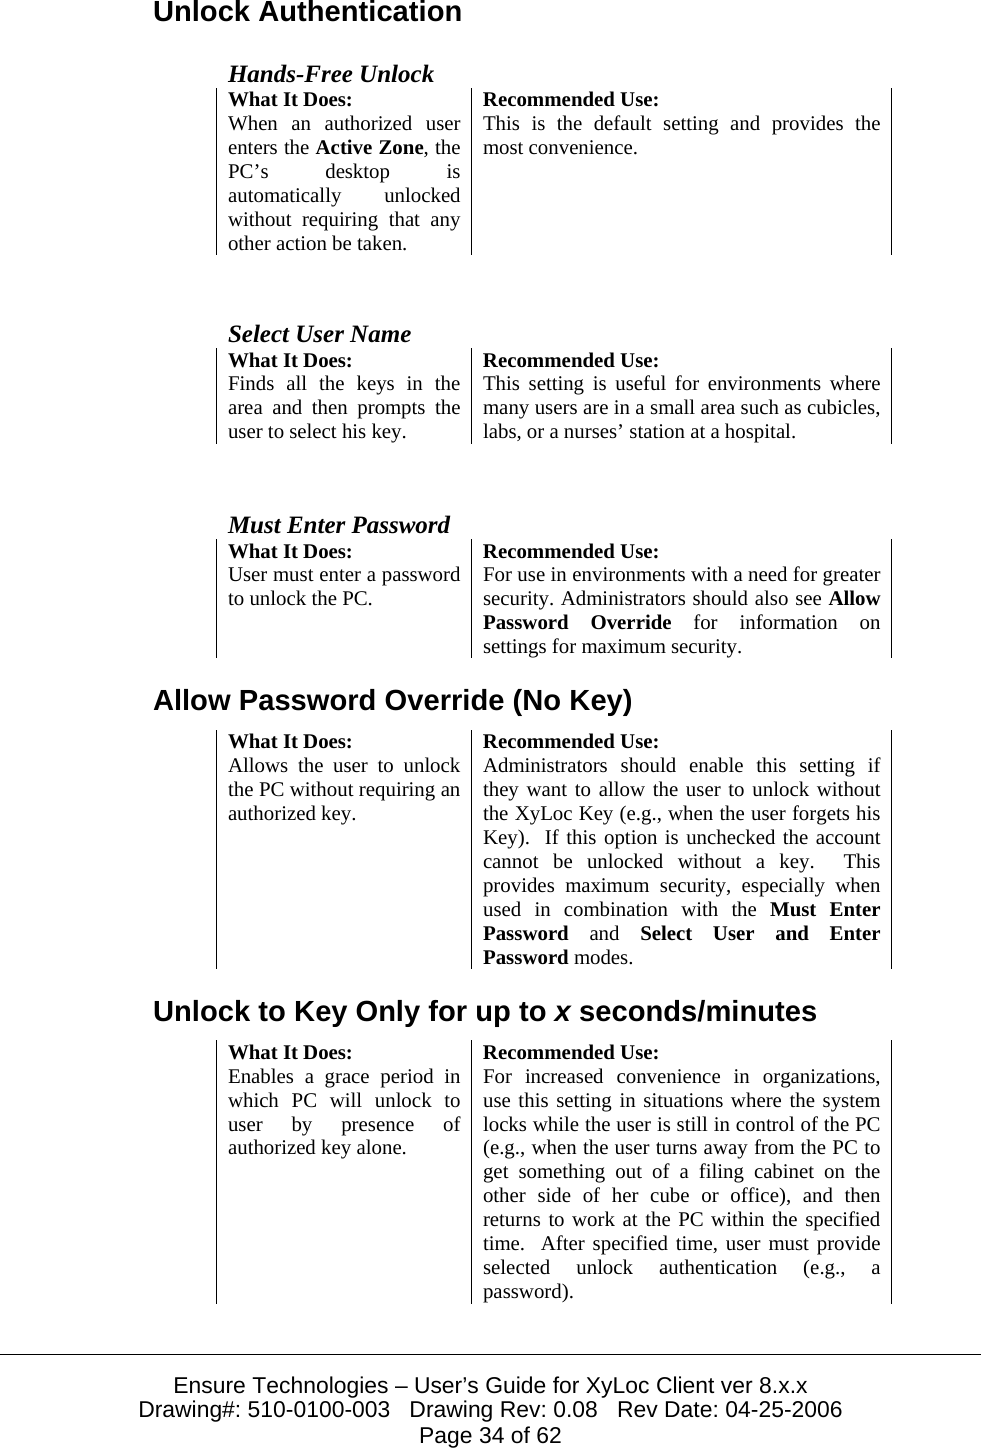  Ensure Technologies – User’s Guide for XyLoc Client ver 8.x.x Drawing#: 510-0100-003   Drawing Rev: 0.08   Rev Date: 04-25-2006 Page 34 of 62 Unlock Authentication Hands-Free Unlock What It Does:  Recommended Use: When an authorized user enters the Active Zone, the PC’s desktop is automatically unlocked without requiring that any other action be taken. This is the default setting and provides the most convenience.  Select User Name What It Does:  Recommended Use: Finds all the keys in the area and then prompts the user to select his key.  This setting is useful for environments where many users are in a small area such as cubicles, labs, or a nurses’ station at a hospital.  Must Enter Password What It Does:  Recommended Use: User must enter a password to unlock the PC.  For use in environments with a need for greater security. Administrators should also see Allow Password Override for information on settings for maximum security. Allow Password Override (No Key) What It Does:  Recommended Use: Allows the user to unlock the PC without requiring an authorized key. Administrators should enable this setting if they want to allow the user to unlock without the XyLoc Key (e.g., when the user forgets his Key).  If this option is unchecked the account cannot be unlocked without a key.  This provides maximum security, especially when used in combination with the Must Enter Password and Select User and Enter Password modes. Unlock to Key Only for up to x seconds/minutes What It Does:  Recommended Use: Enables a grace period in which PC will unlock to user by presence of authorized key alone. For increased convenience in organizations, use this setting in situations where the system locks while the user is still in control of the PC (e.g., when the user turns away from the PC to get something out of a filing cabinet on the other side of her cube or office), and then returns to work at the PC within the specified time.  After specified time, user must provide selected unlock authentication (e.g., a password). 